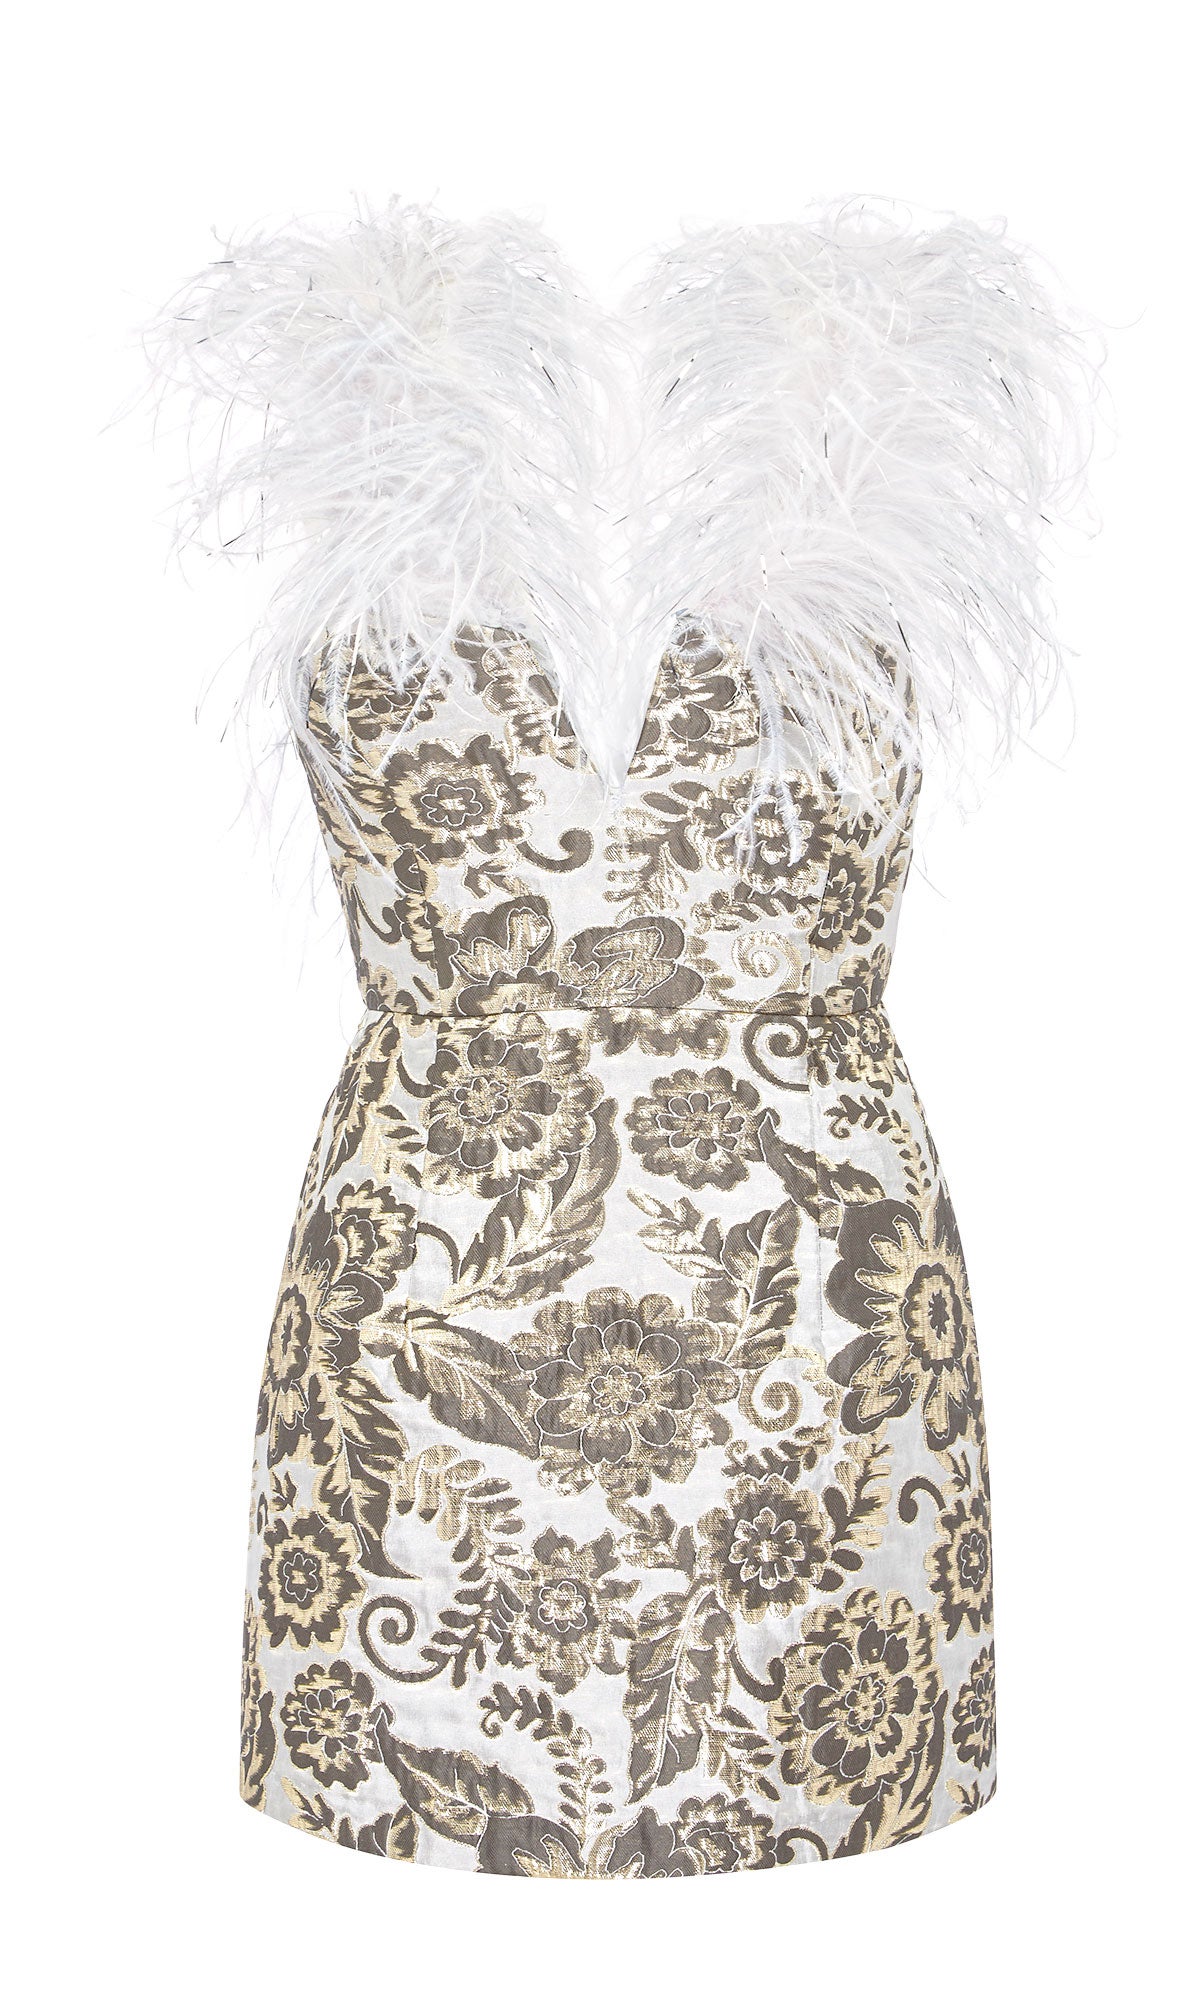 9 Head-Turning Party Dresses That Will Make Your New Year's Eve One To Remember
